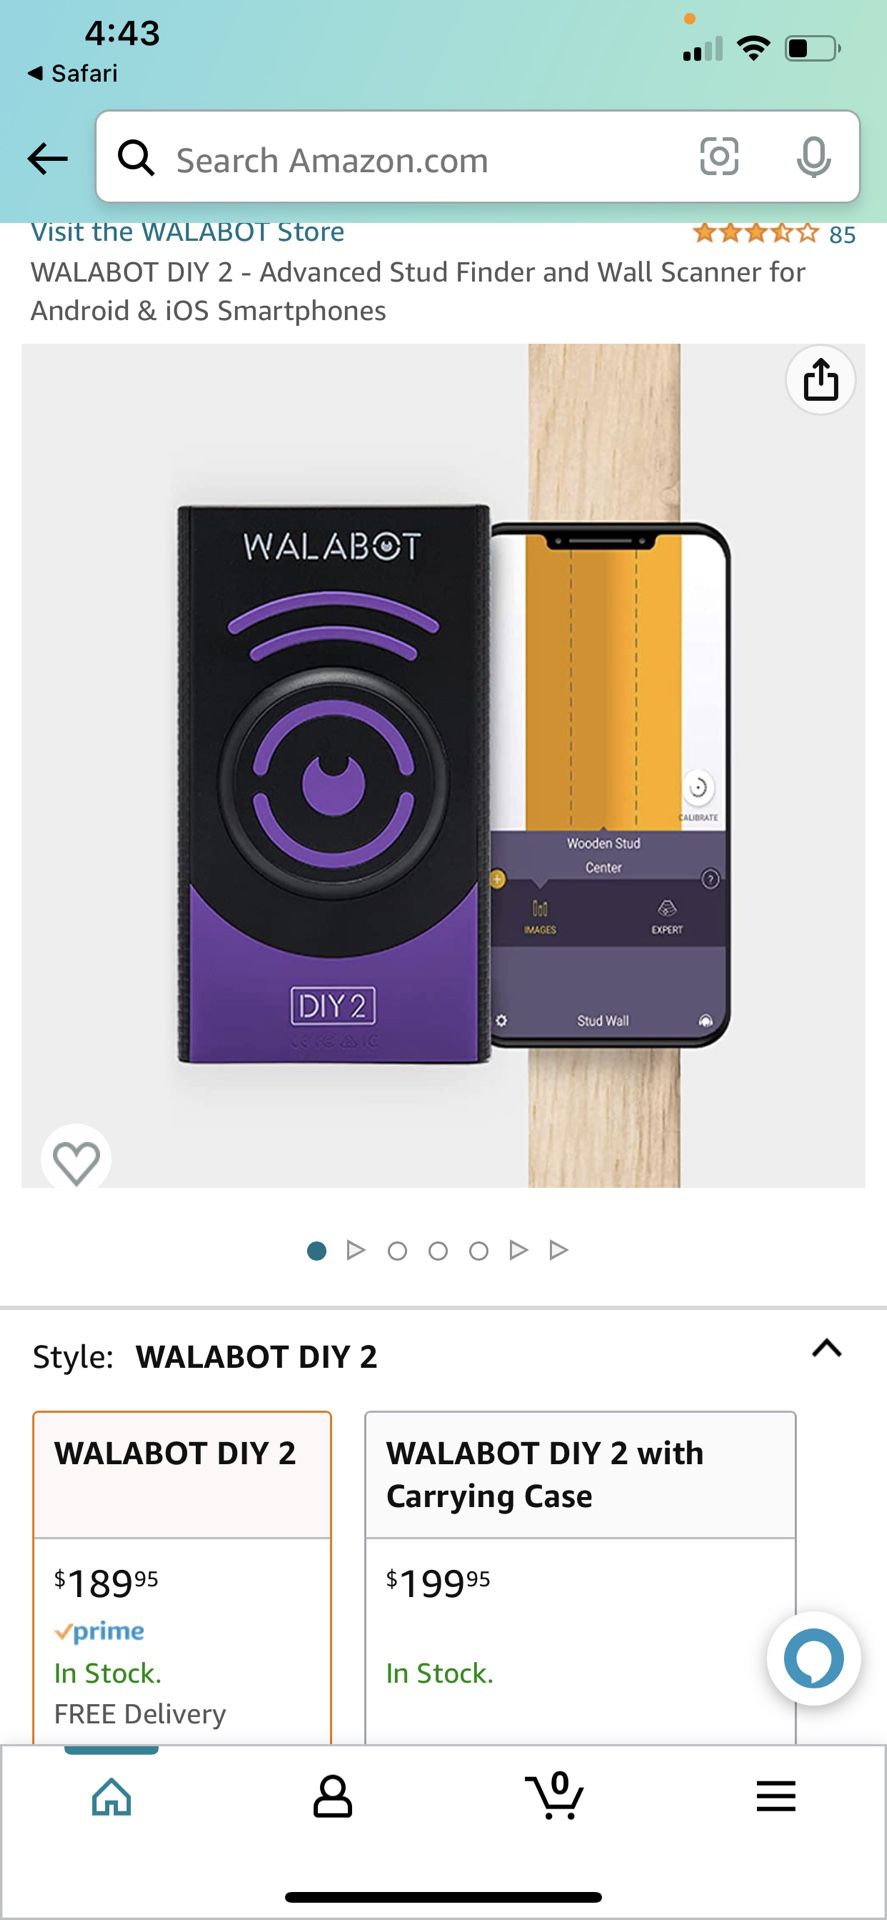 WALABOT DIY 2 - Advanced Stud Finder and Wall Scanner for Android & iOS  Smartphones